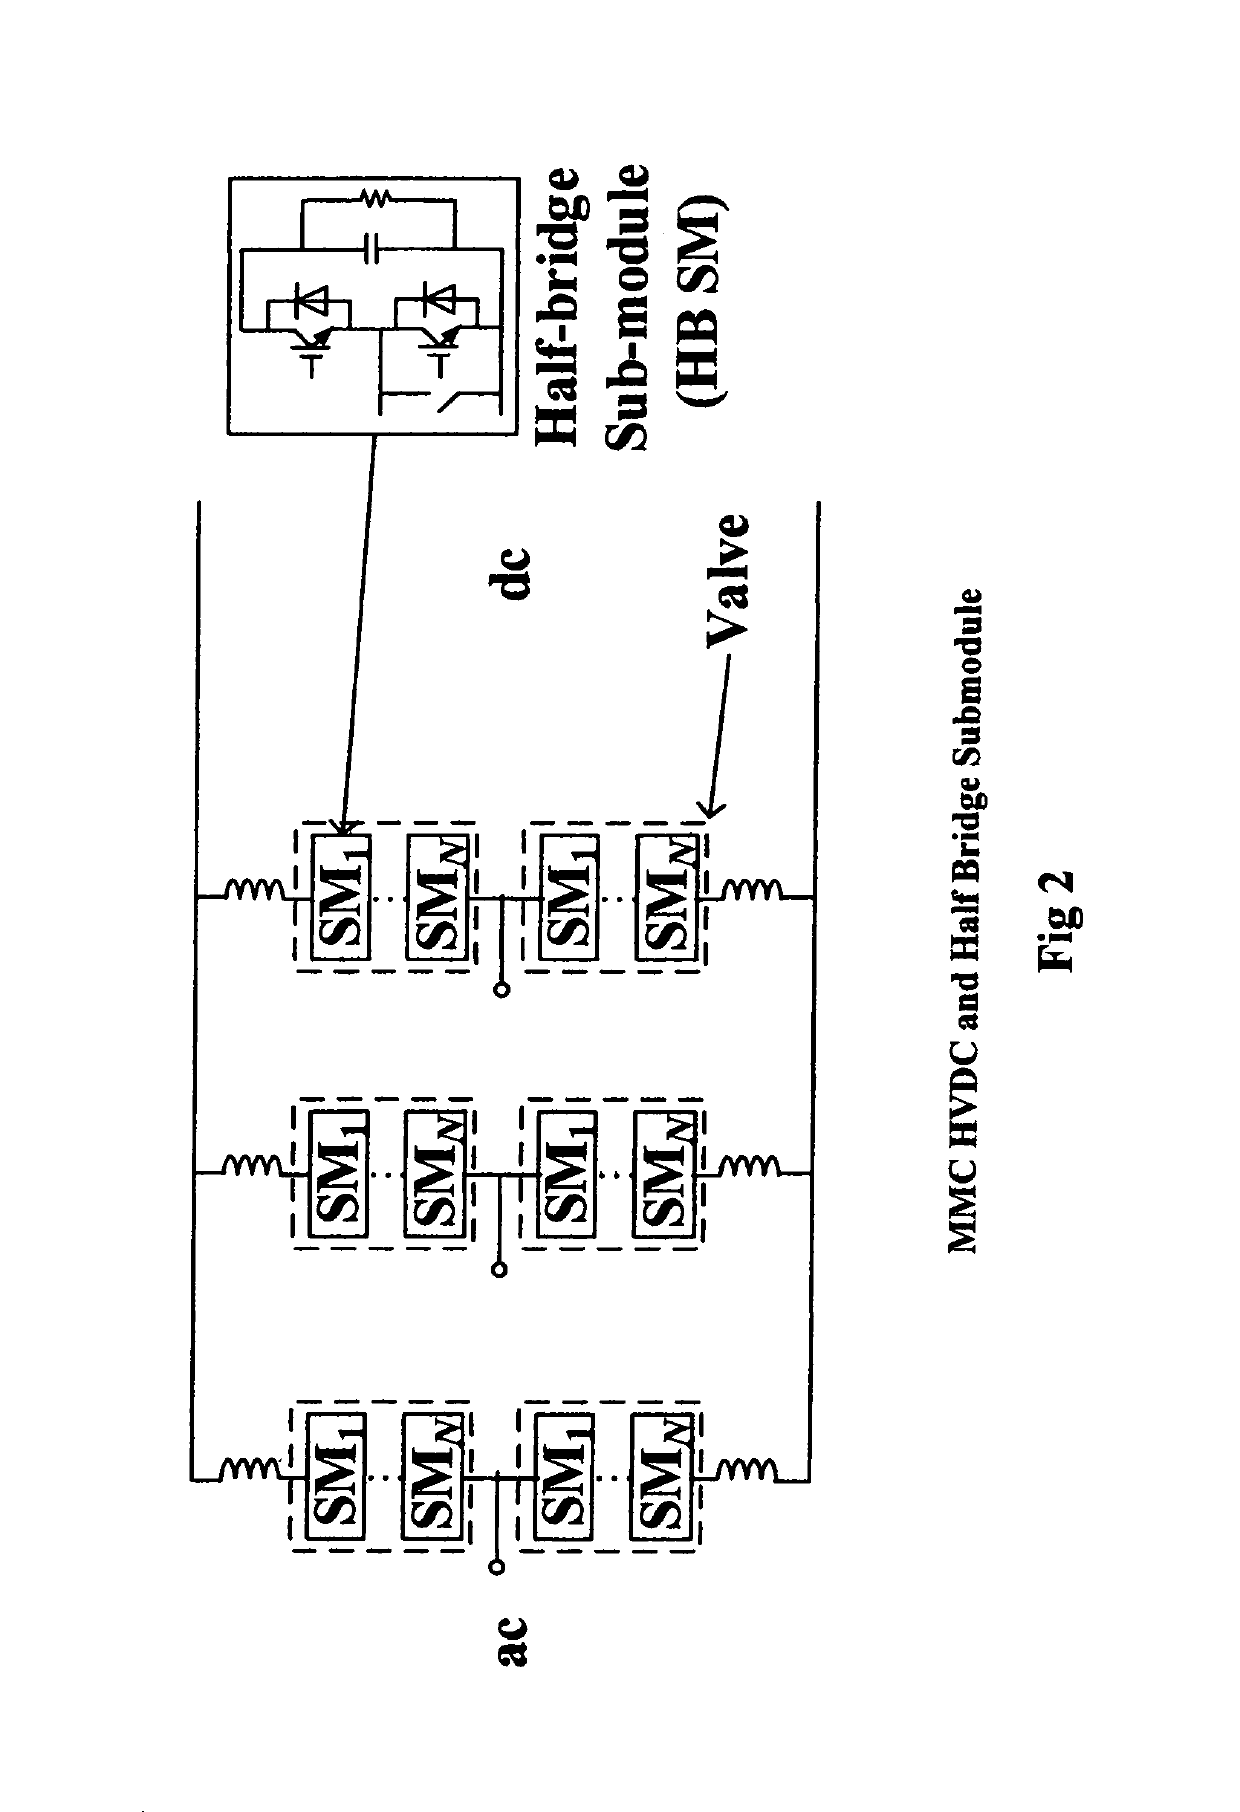 Apparatus and method for modelling a modular multilevel converter in an electronic simulator